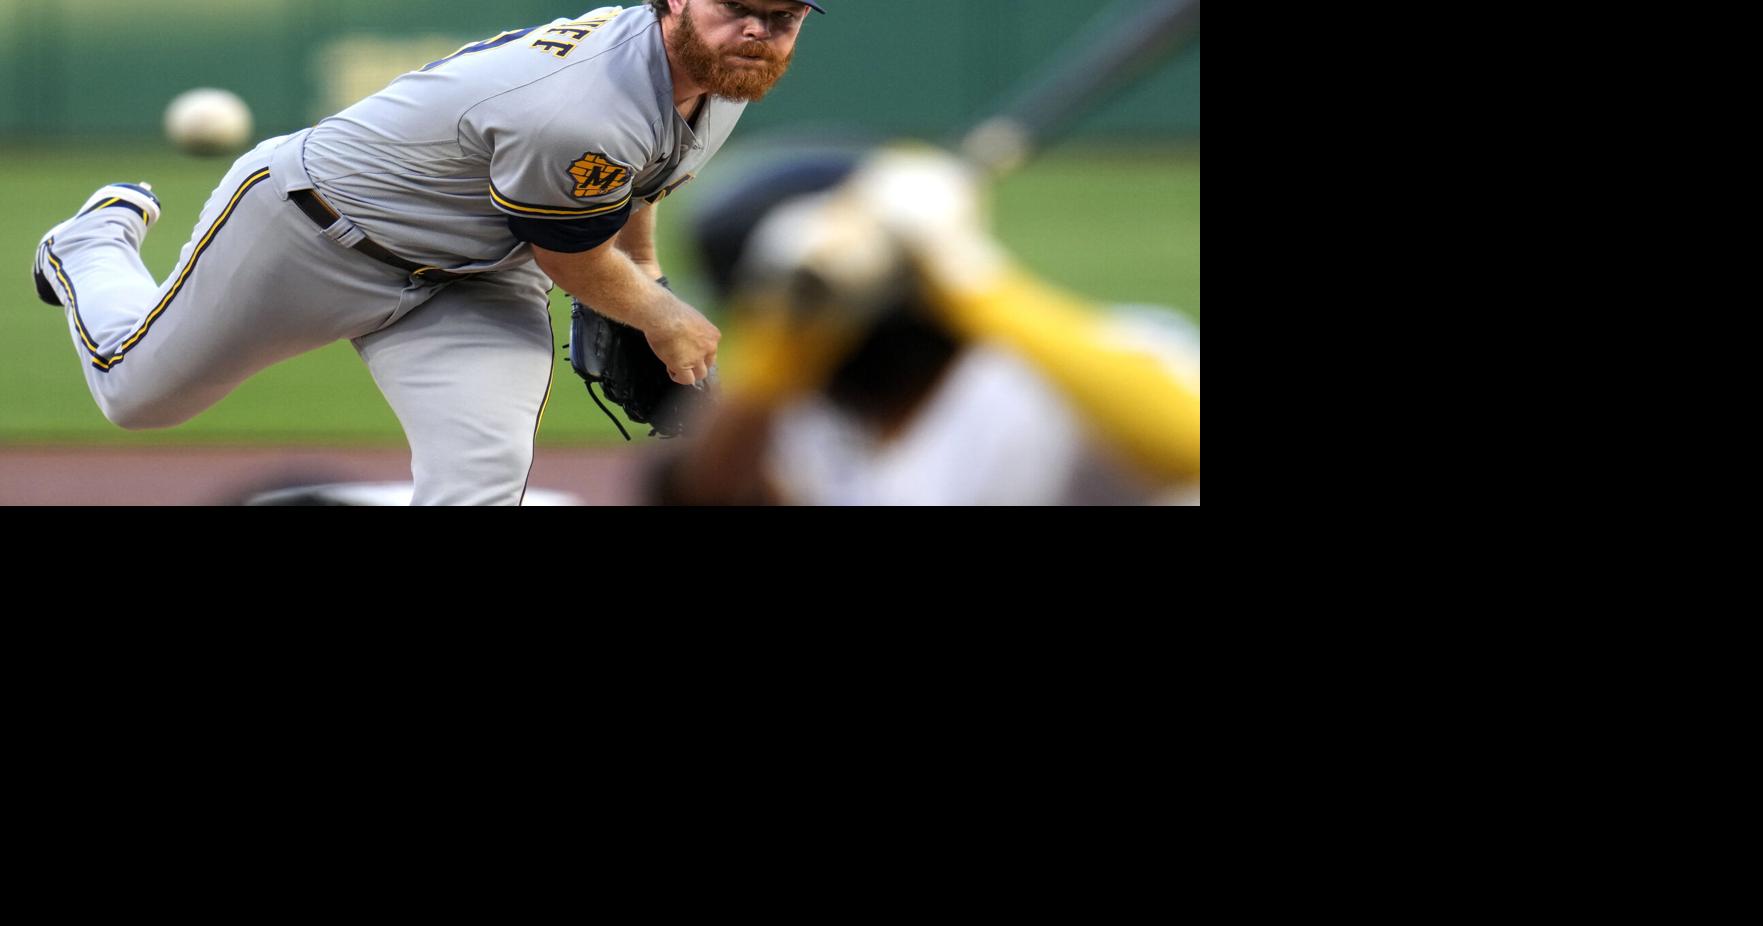 Maturation, dominance of Oneil Cruz on display in Pirates' opening